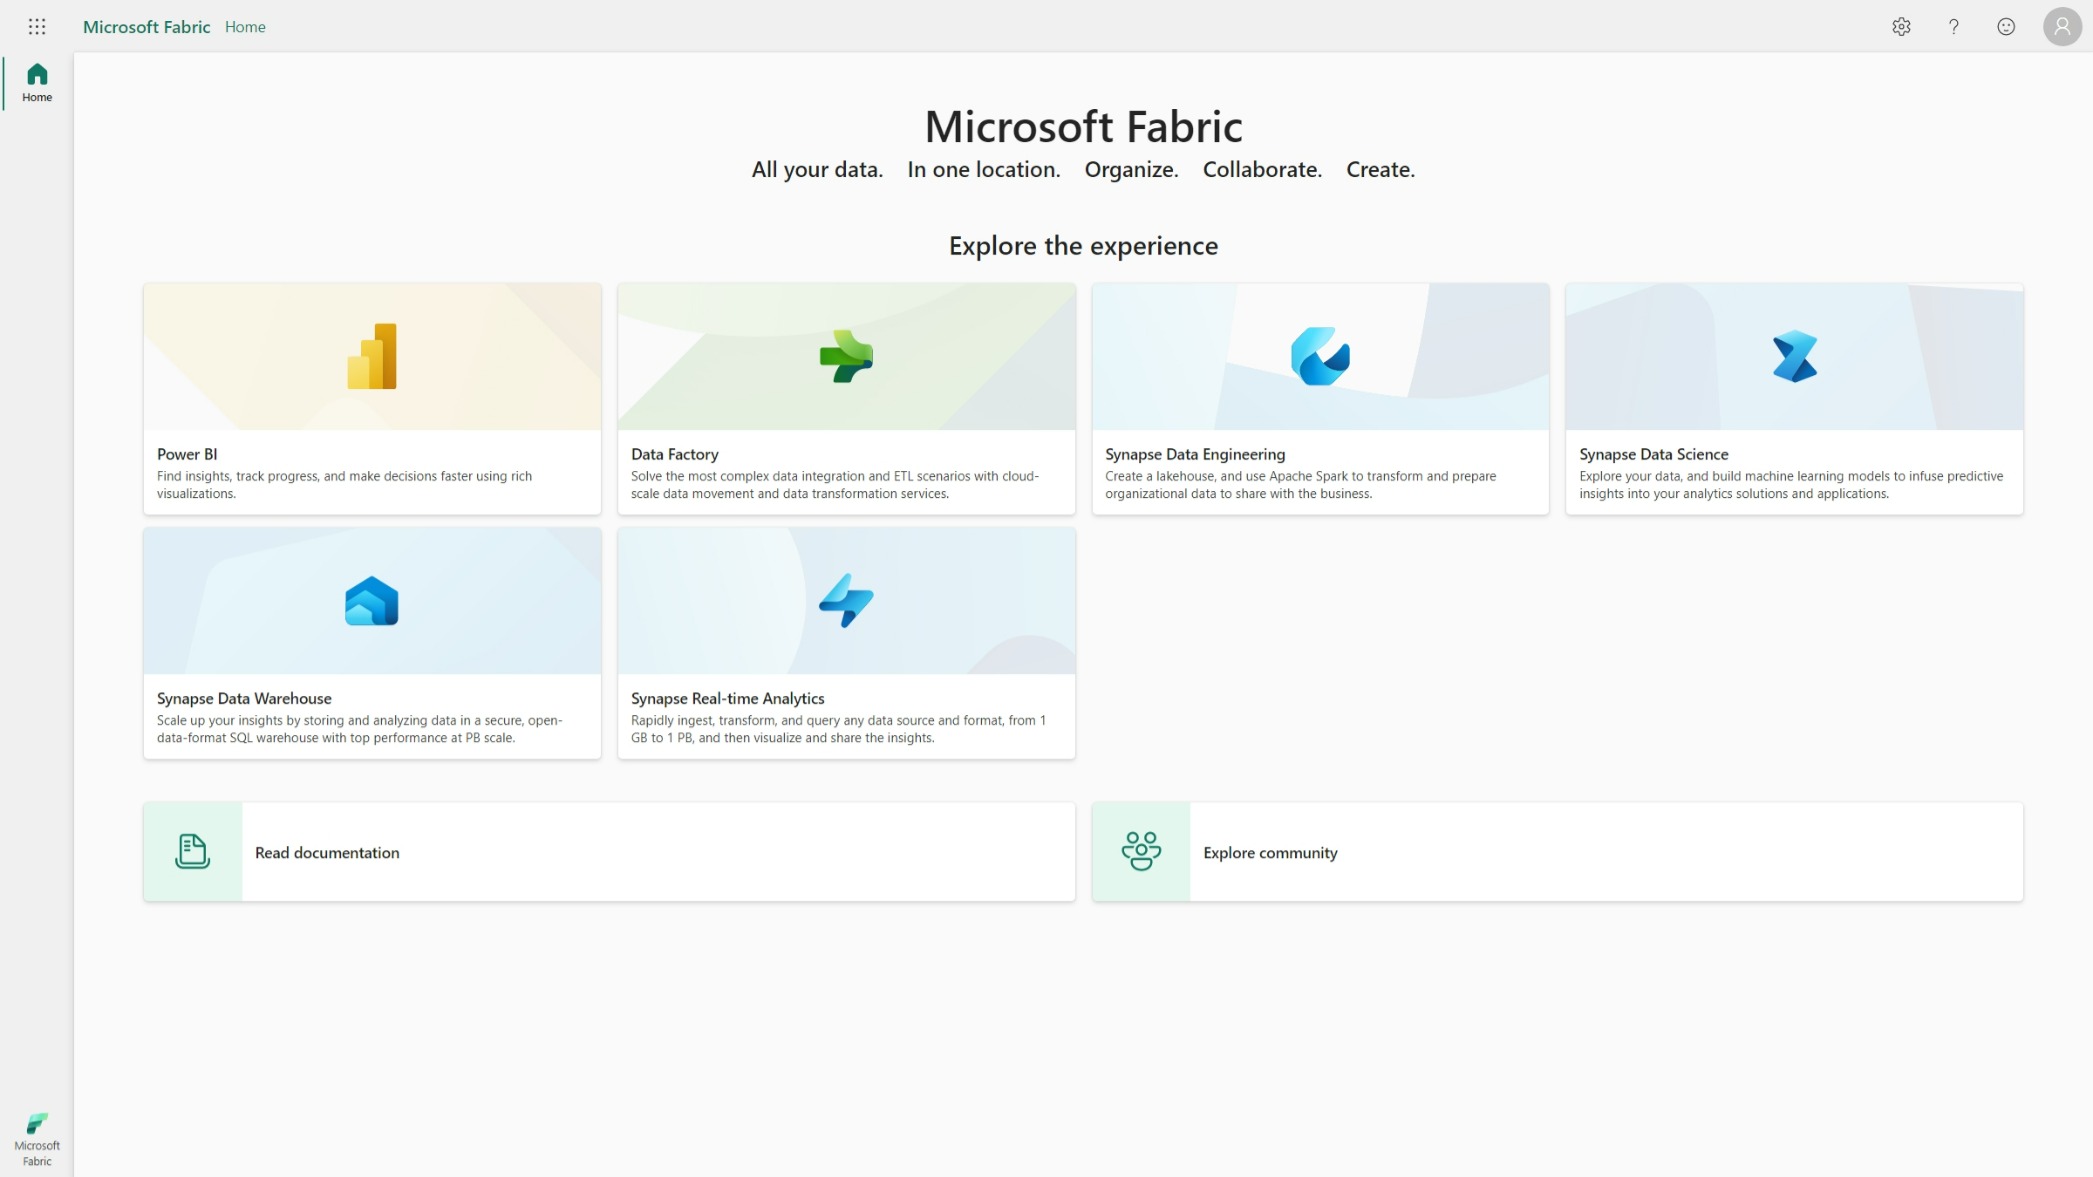 Welcome to the 3rd generation: SQL in Microsoft Fabric